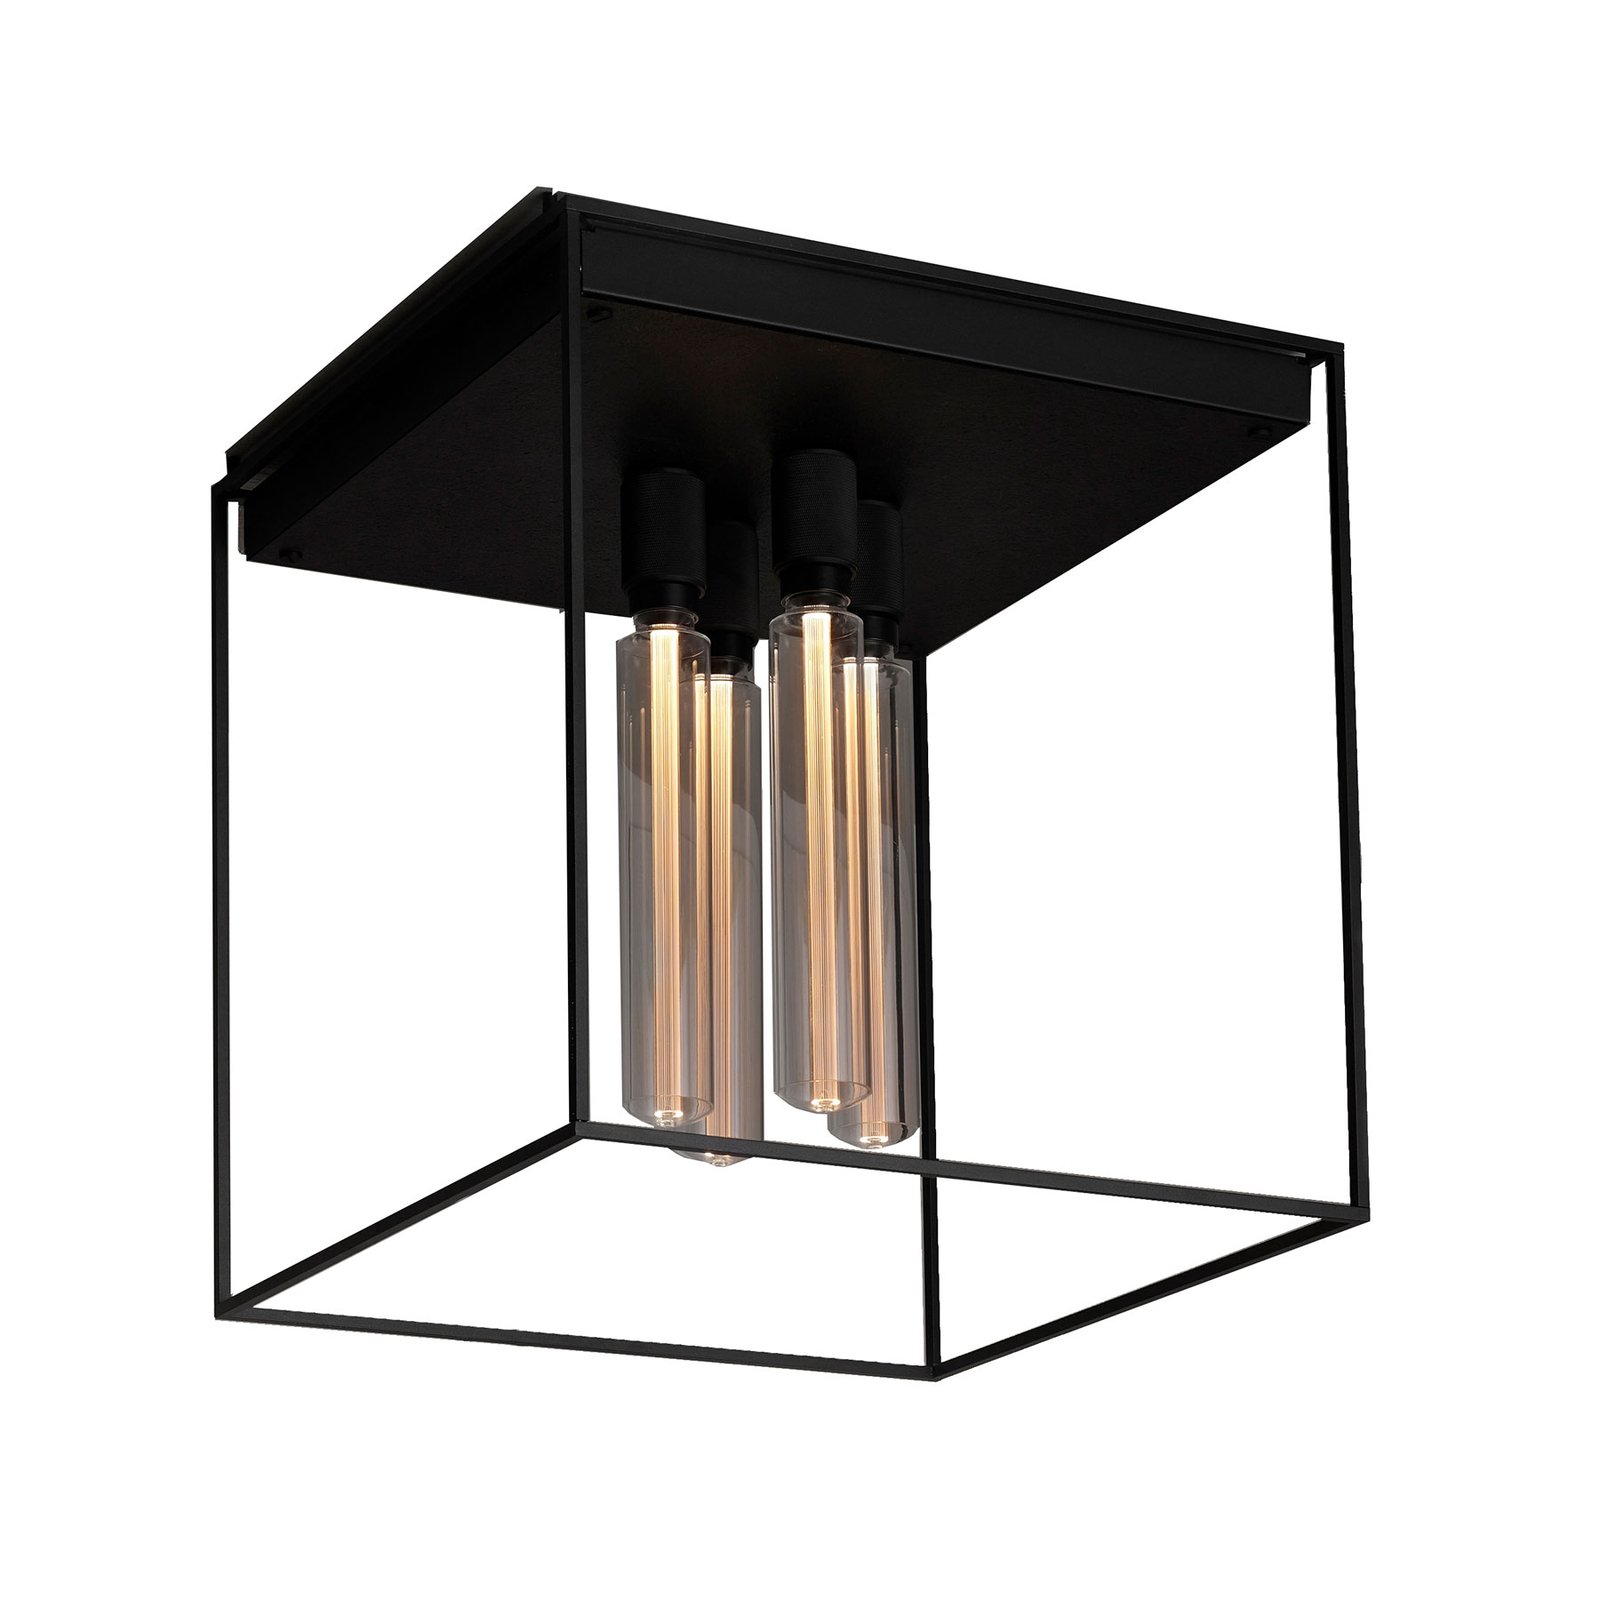 Buster + Punch Caged Ceiling 4.0 LED marmer black